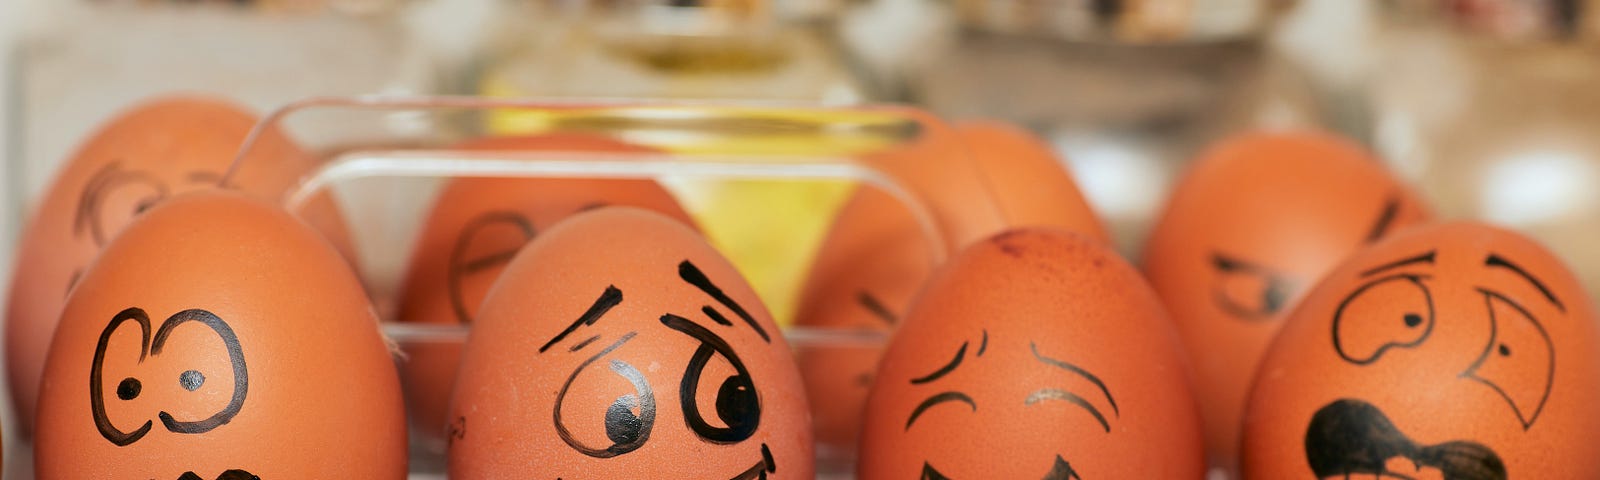 Four eggs with various emotive faces drawn on with sharpie